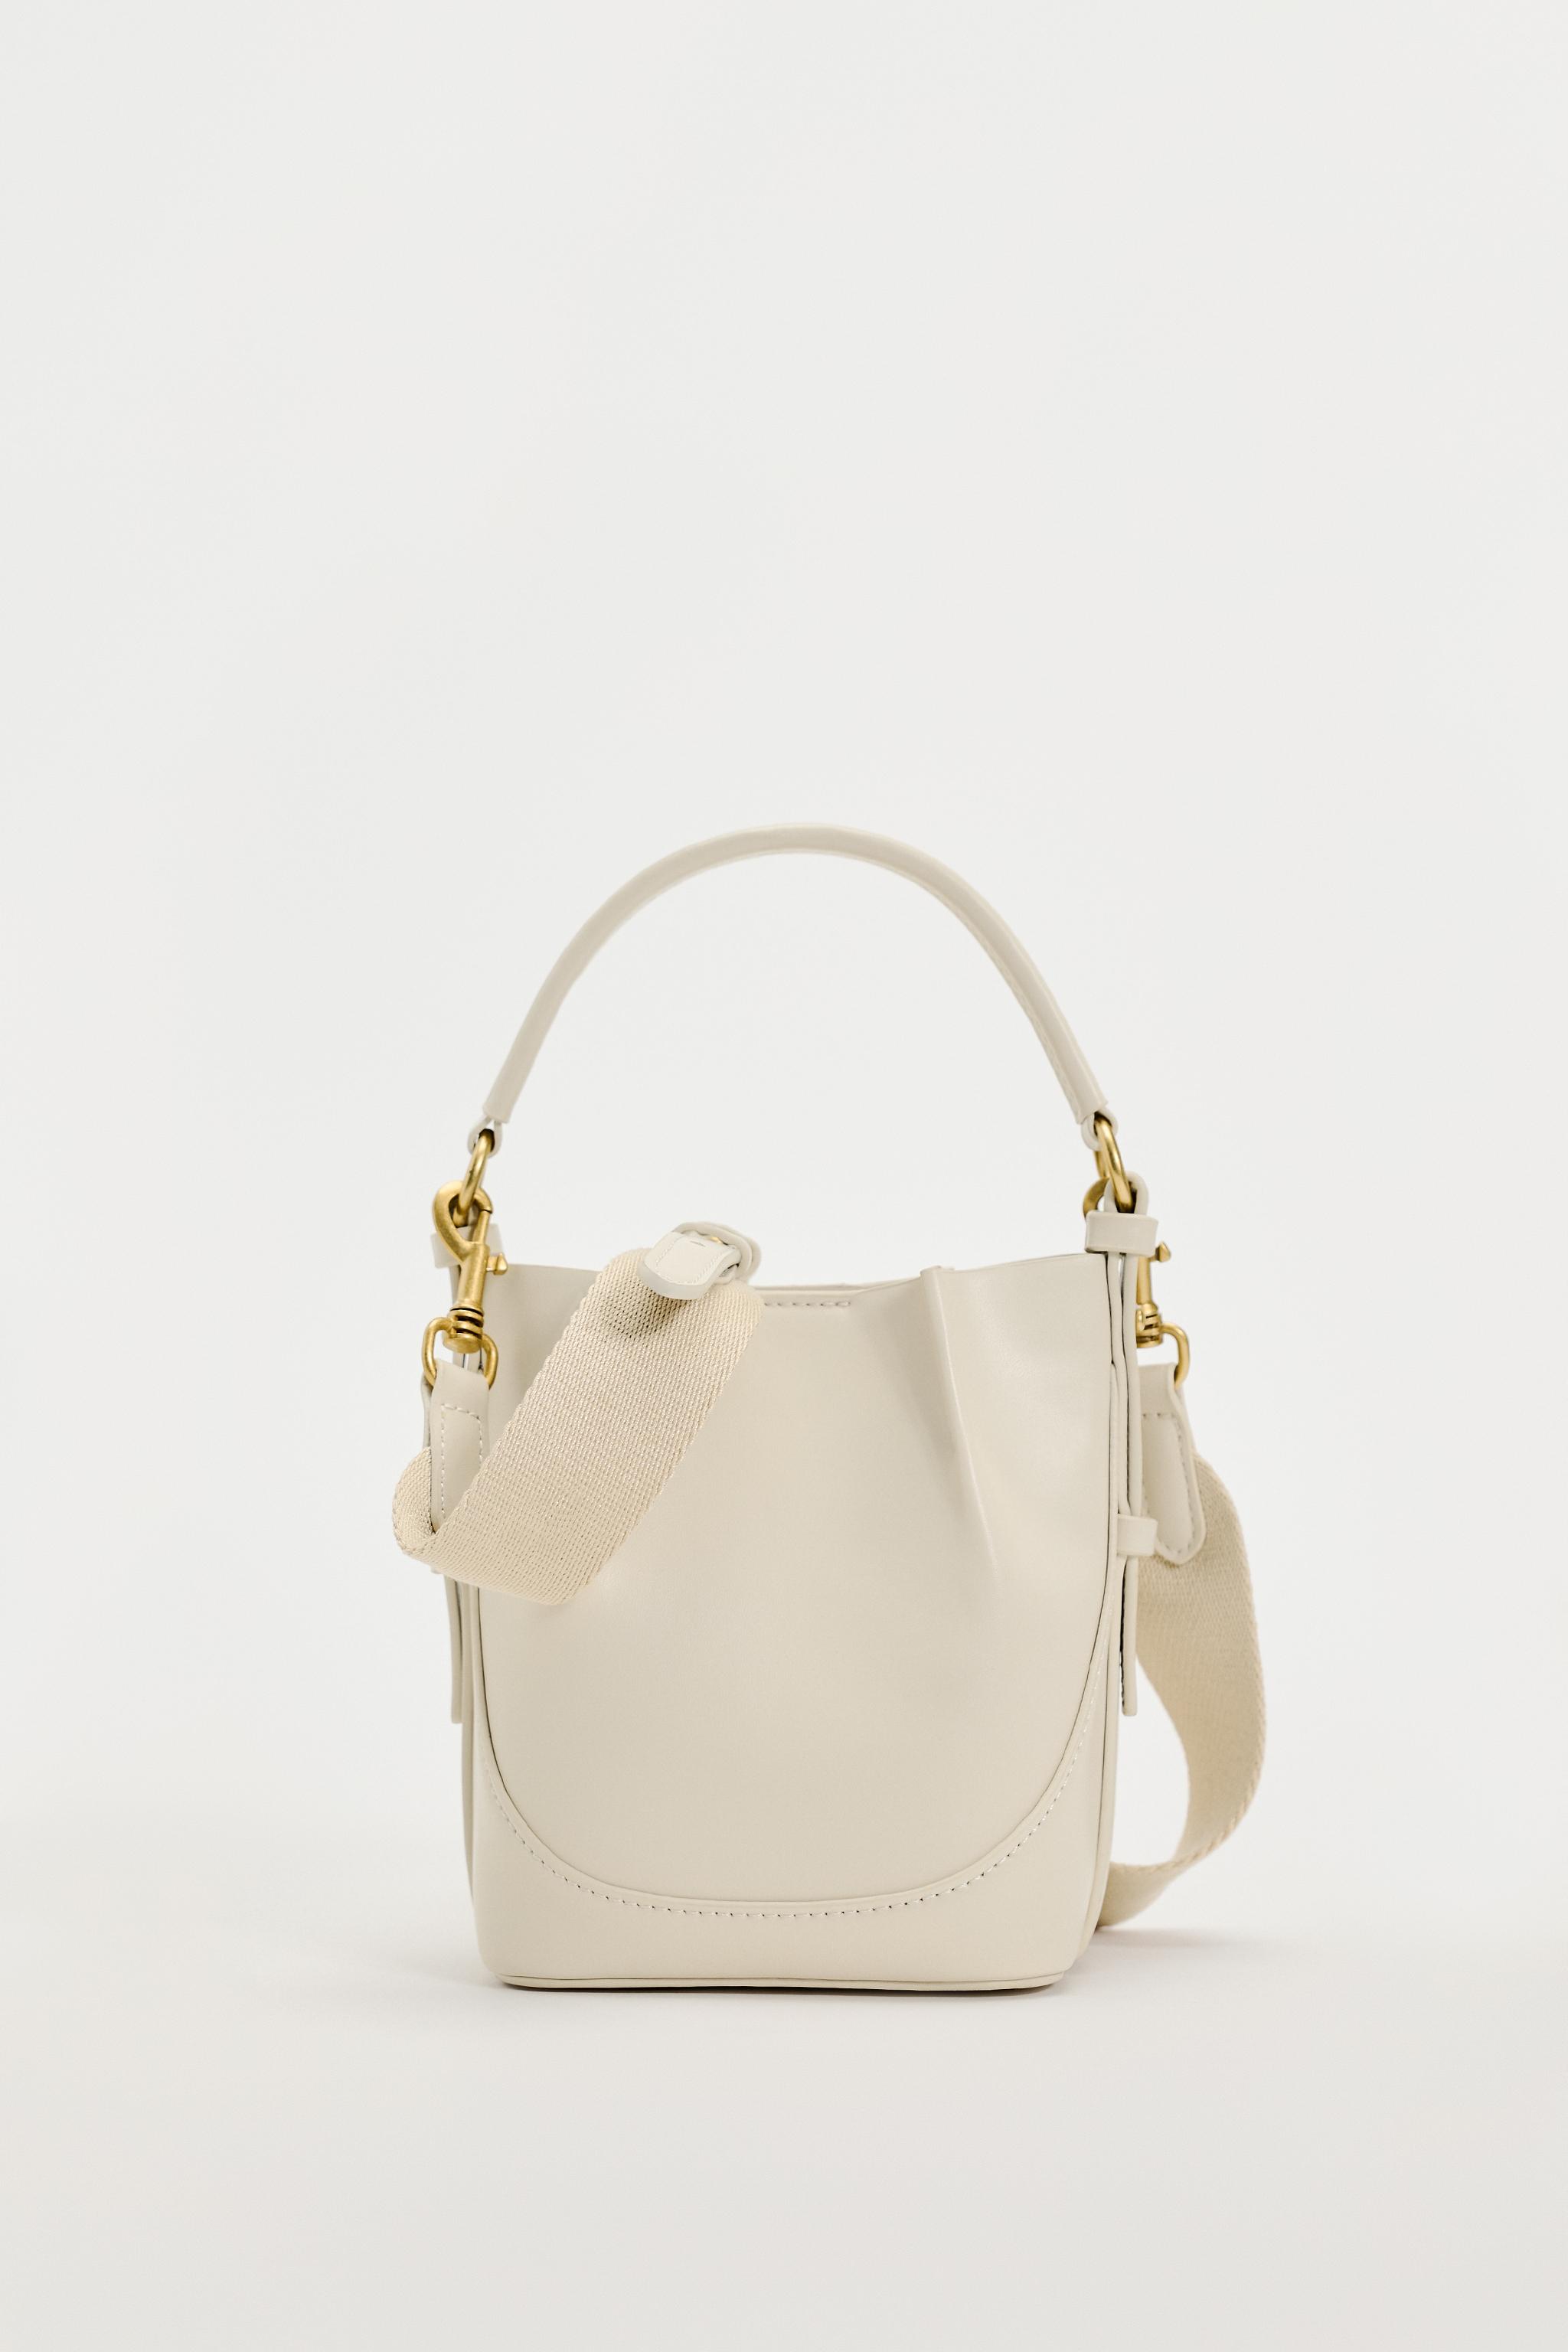 Women's Bags | ZARA United States - Page 4